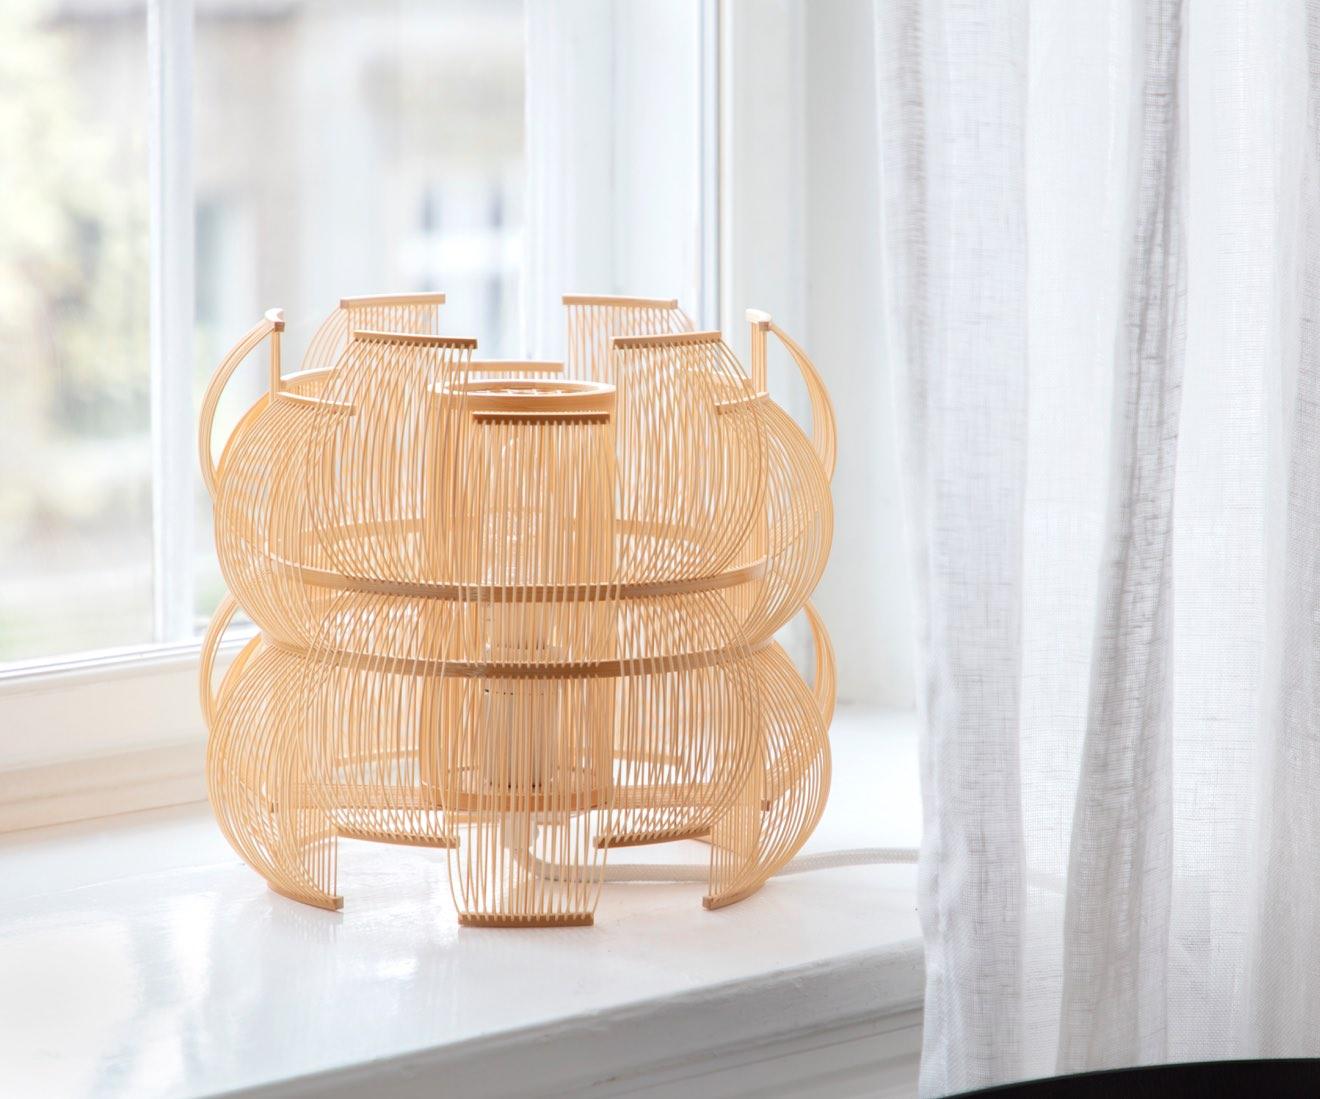 The SEN table lamp is a unique and contemporary piece of light art that builds on tradition while revitalizing traditional Japanese craftsmanship.  Also available as a pendant.

Sen means lines in Japanese and the many bamboo strips that are bent